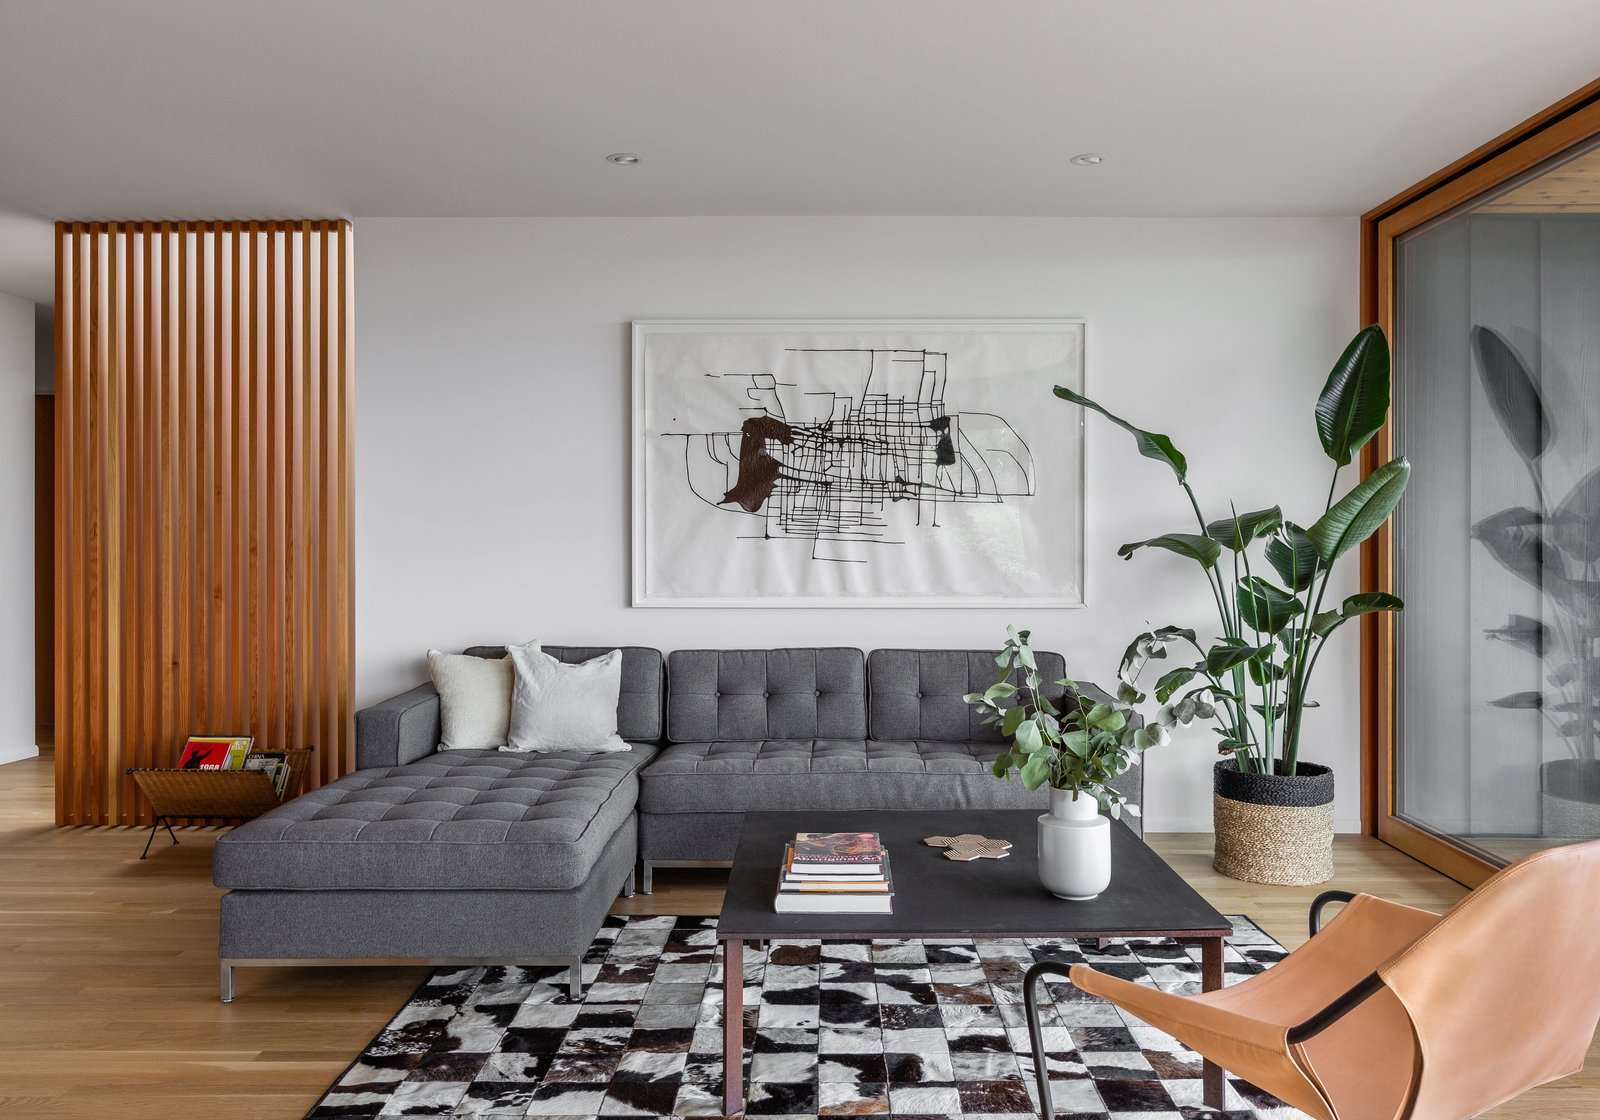 Now, the furniture grouping comfortably occupies the room. A sectional from Gus Modern sits with a custom steel coffee table and Paulistano Armchair.